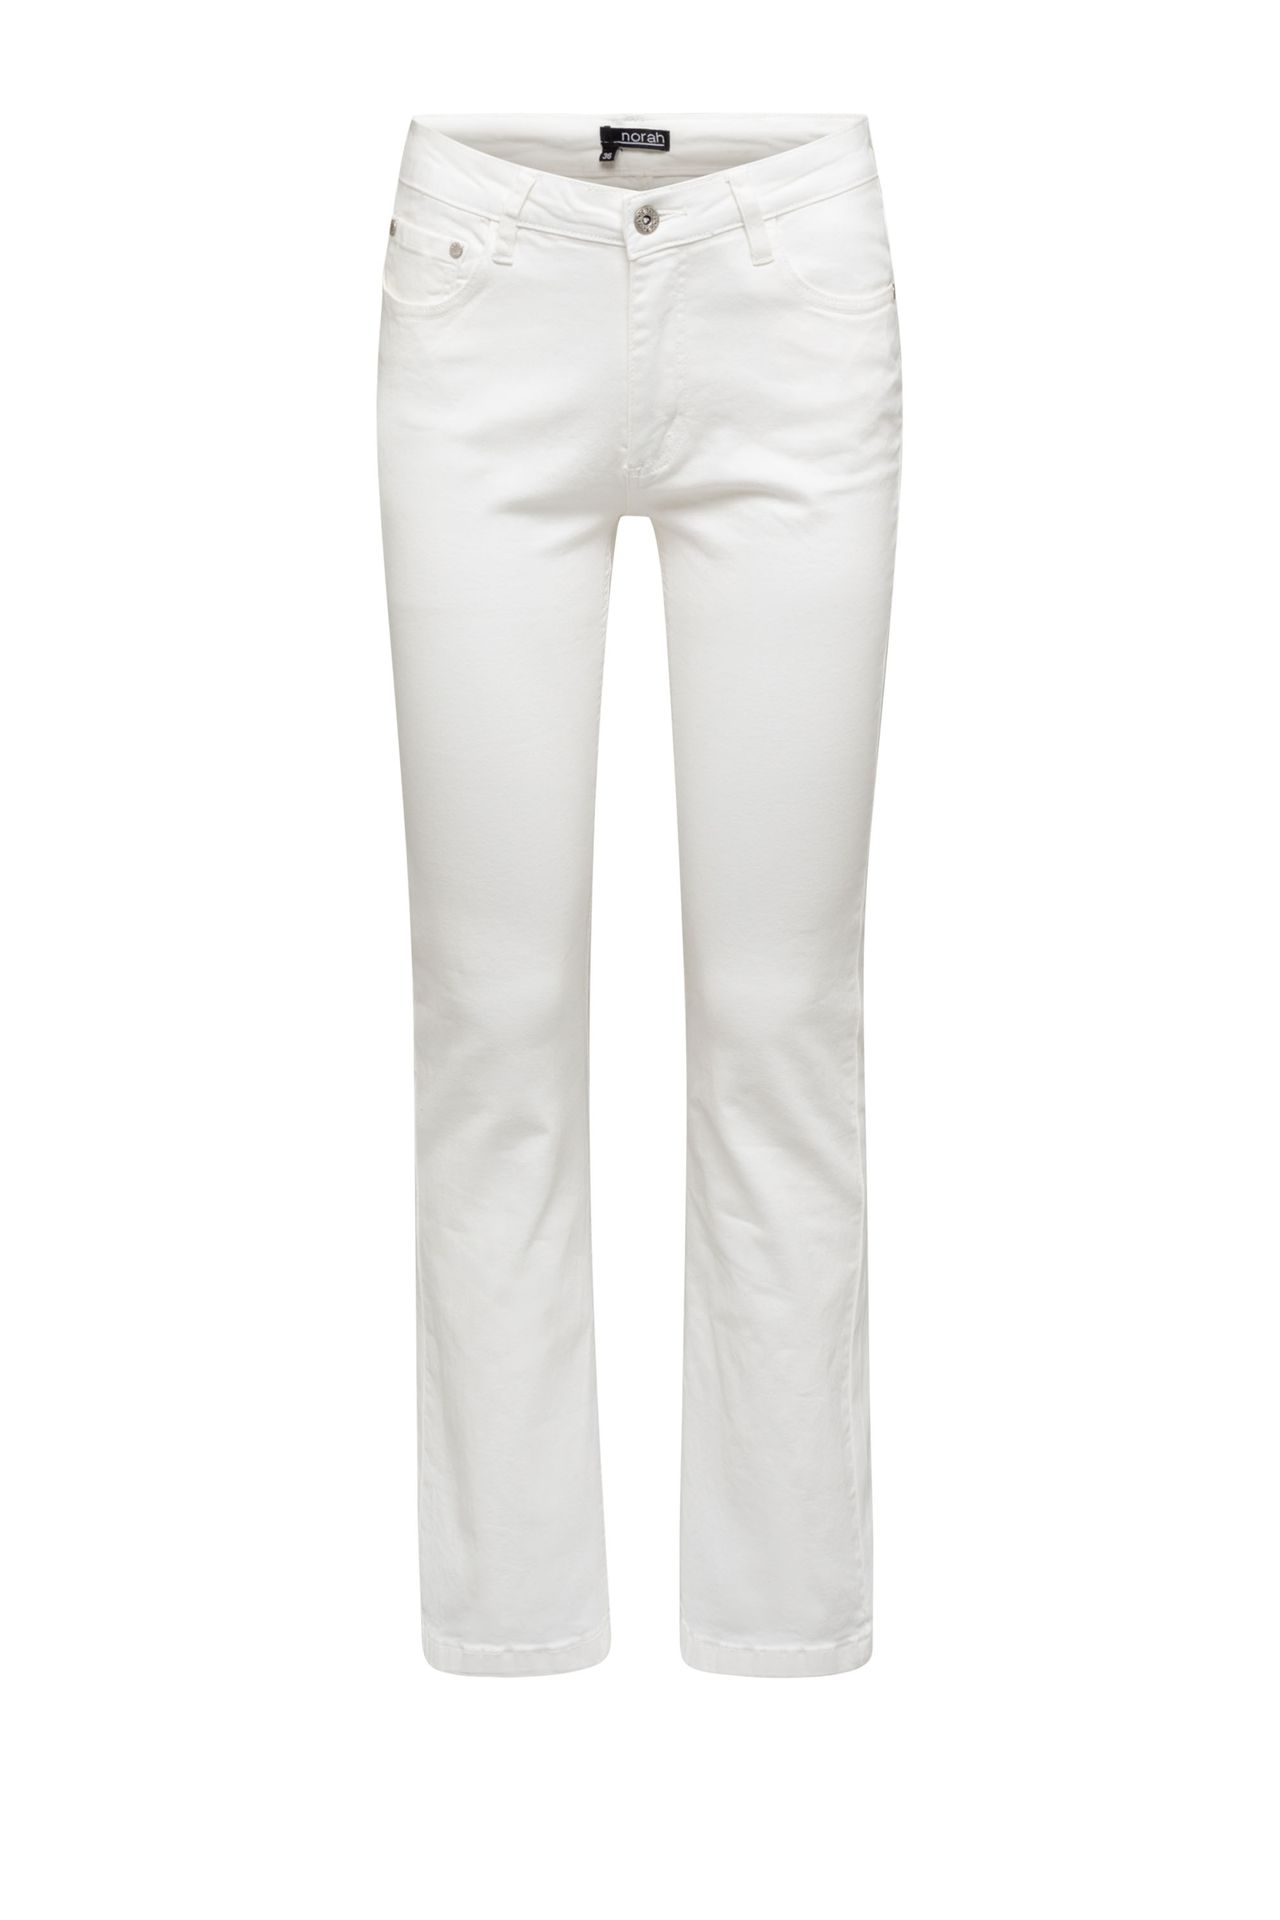  Witte flared jeans Wit P-212358-100